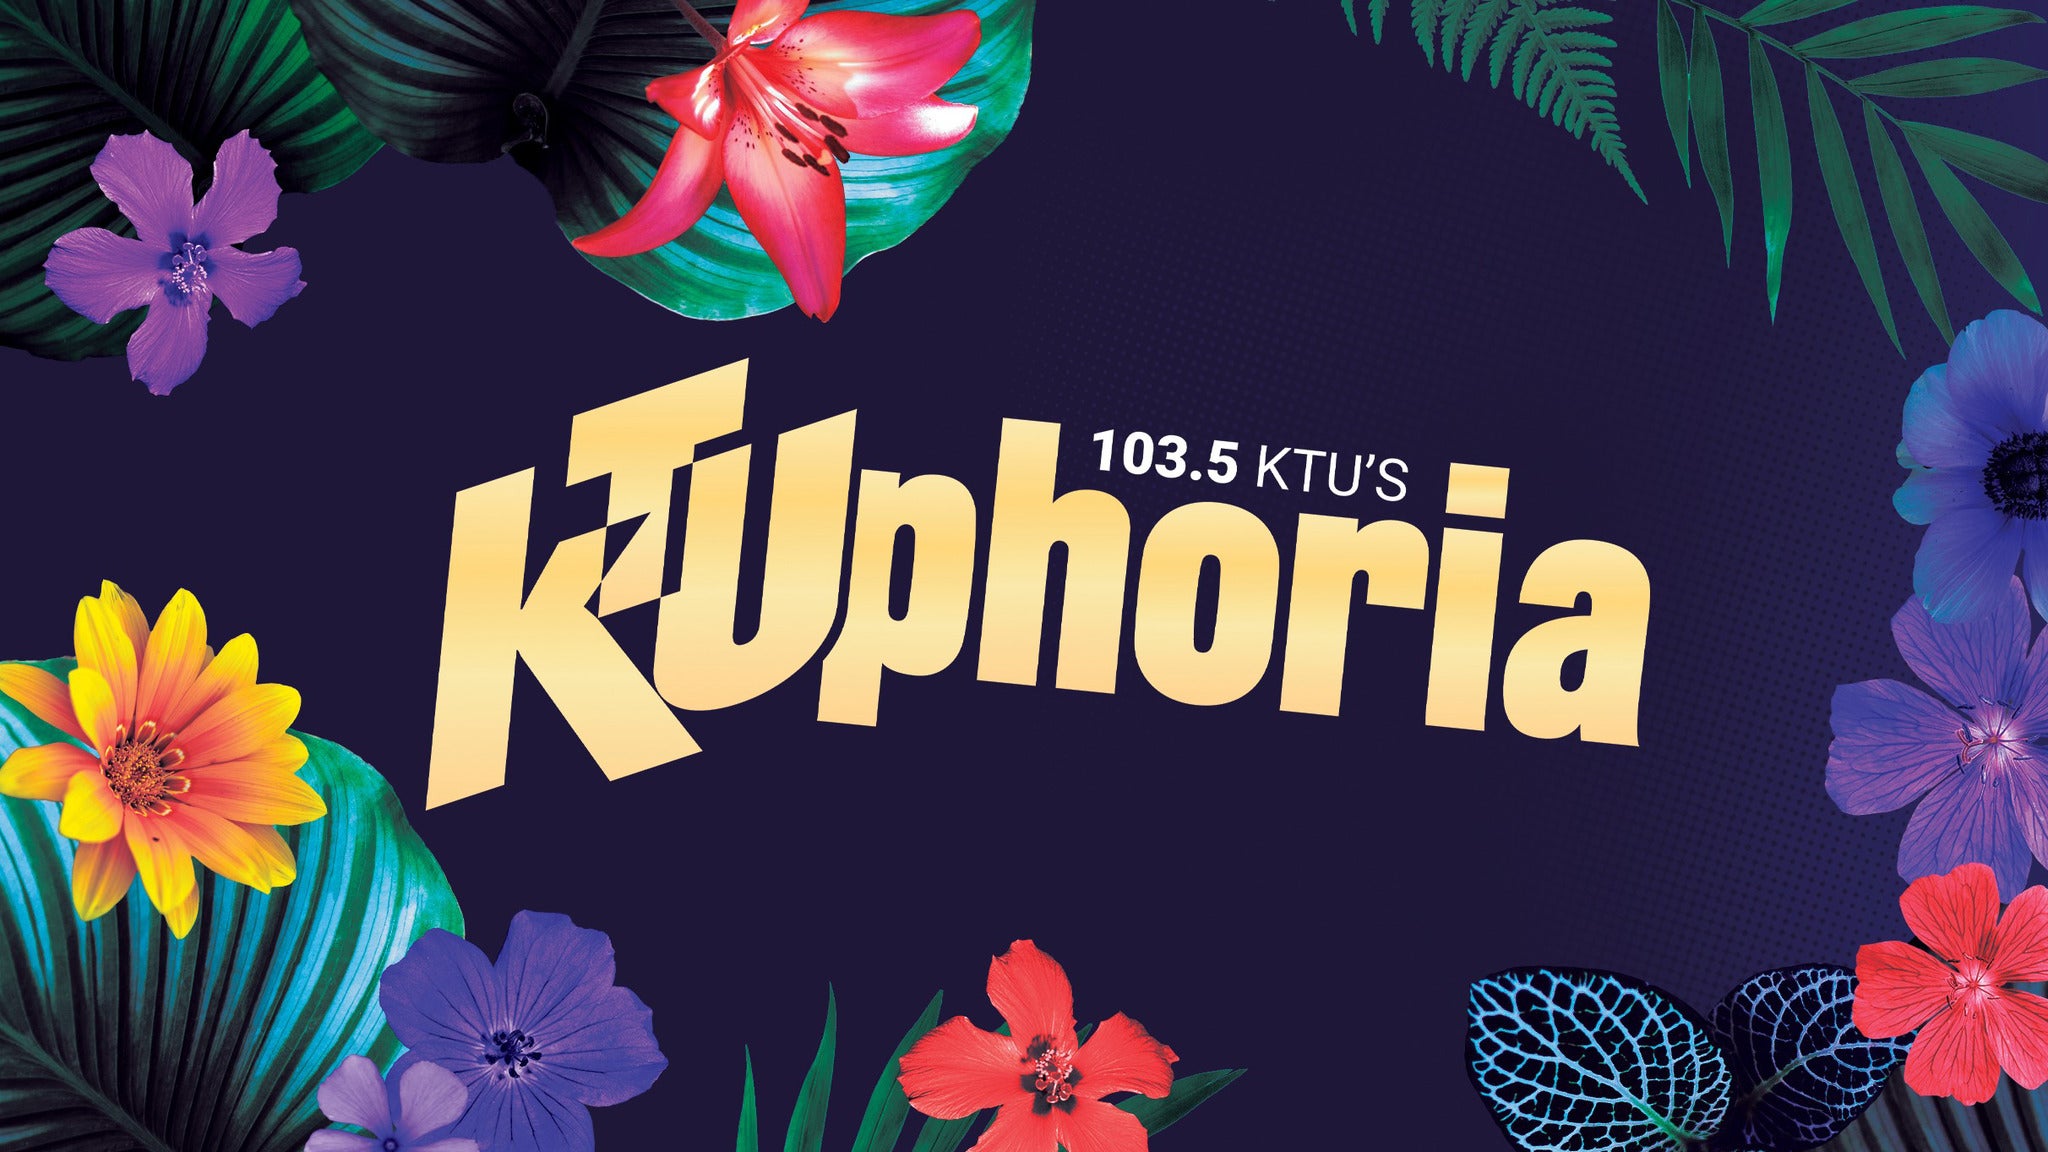 103.5 KTUphoria featuring Kylie Minogue & more in Wantagh promo photo for Concert Week Rakuten presale offer code